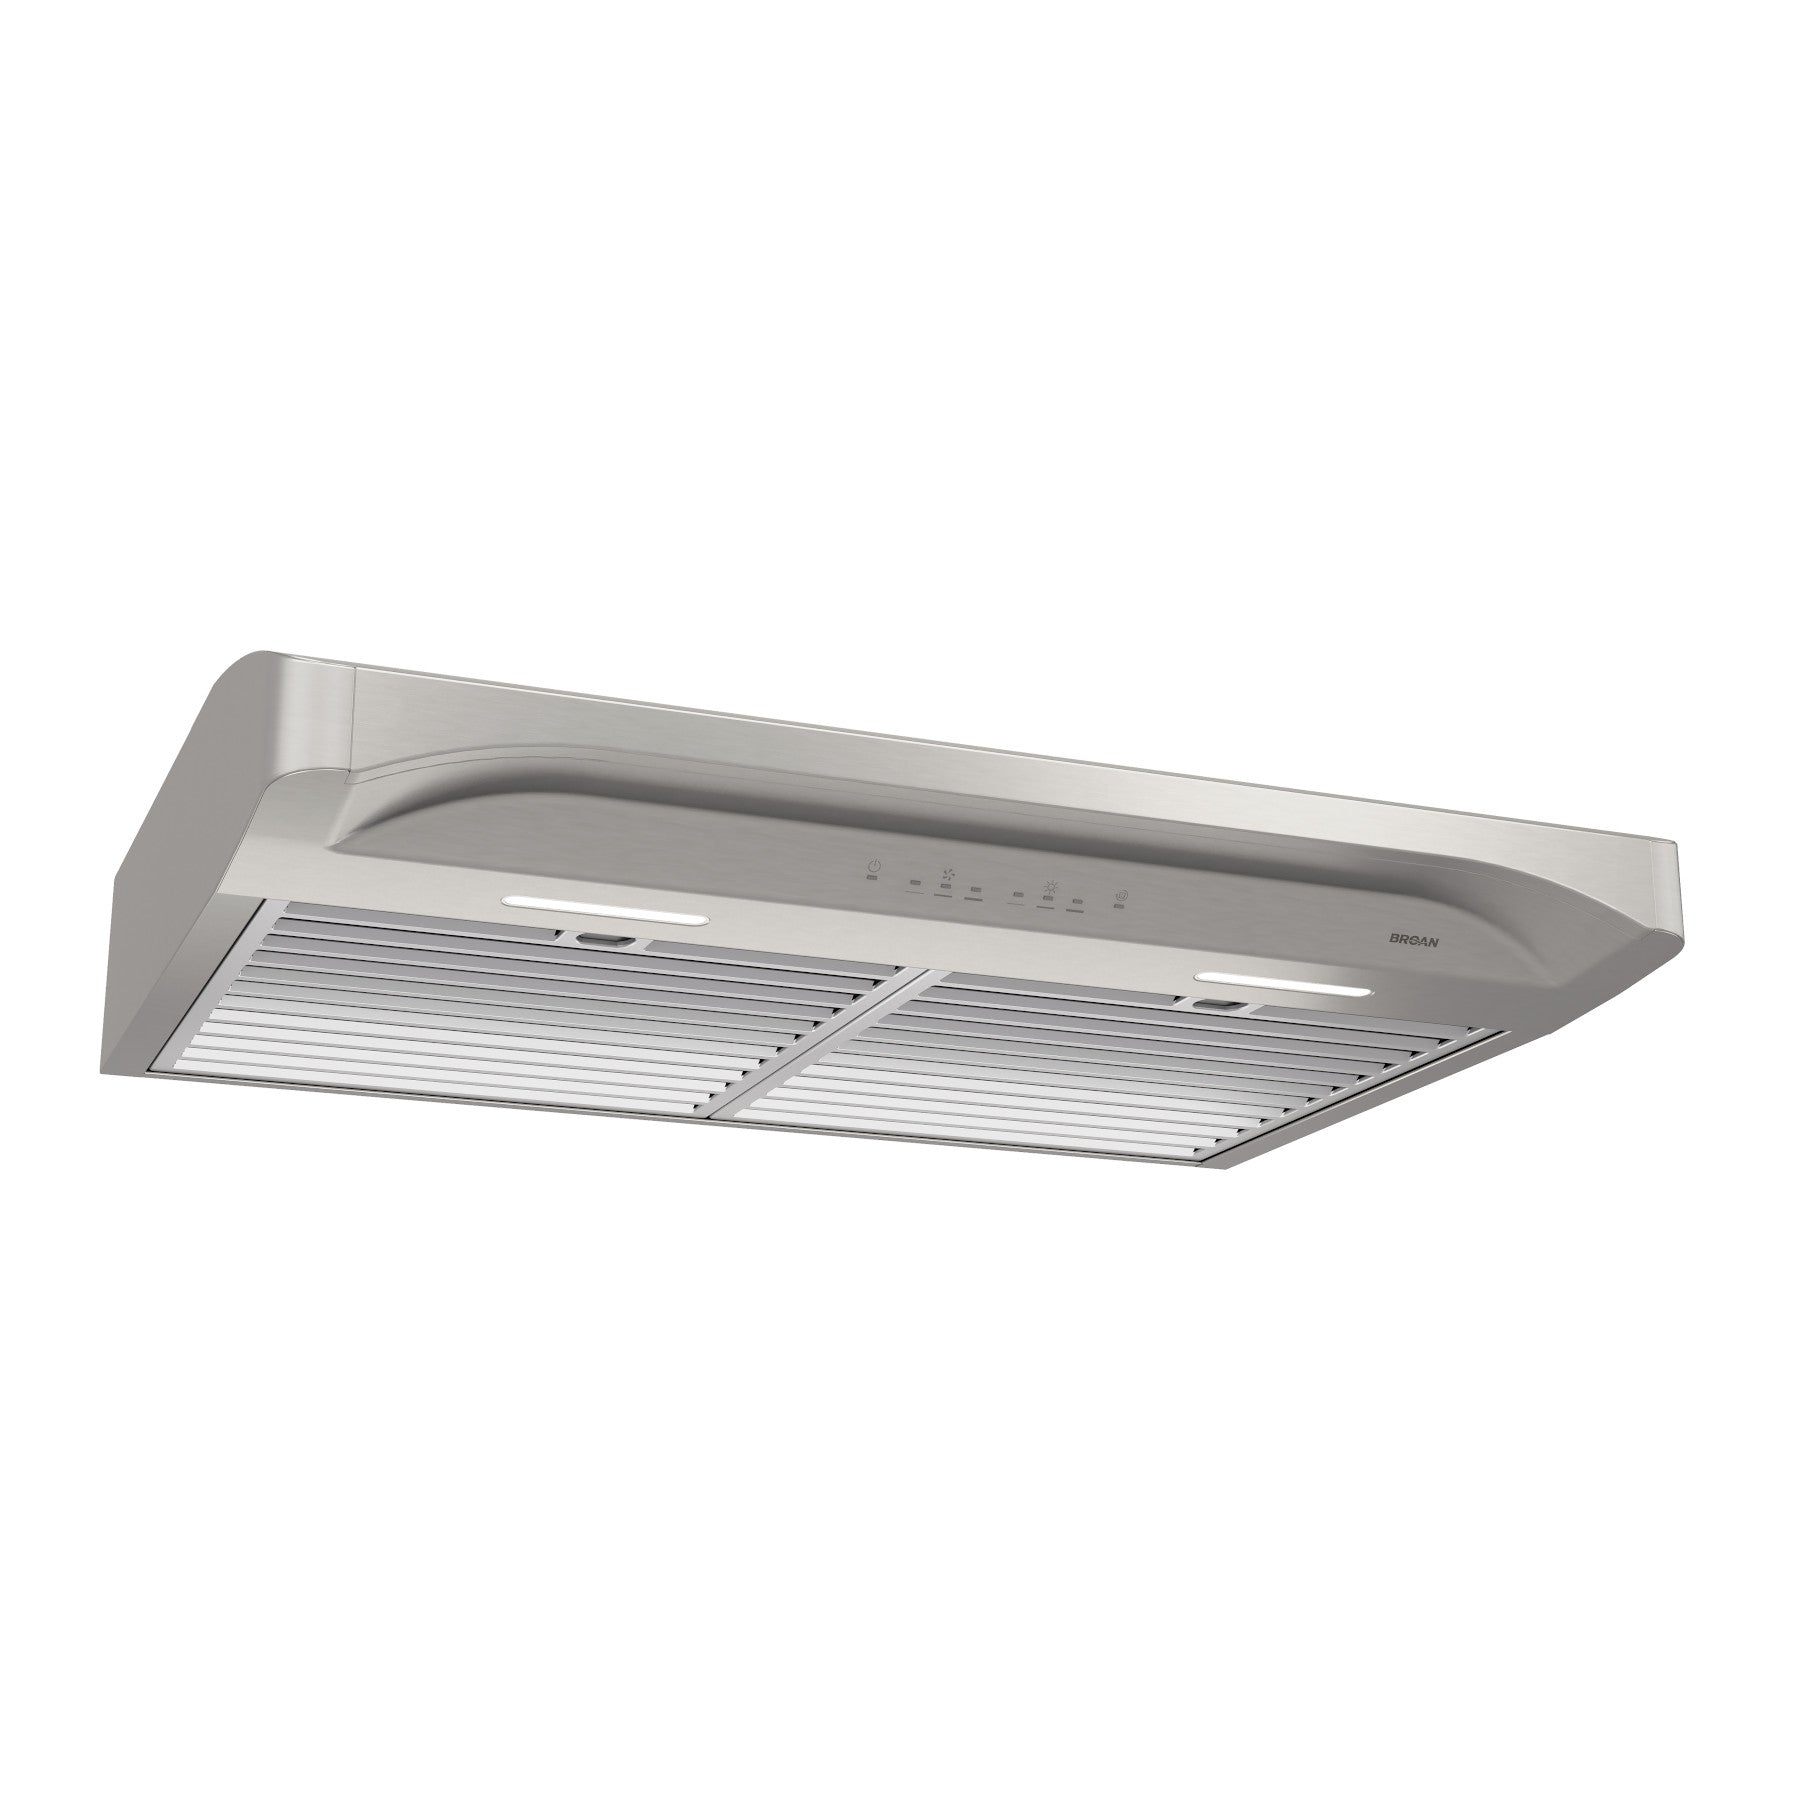 Broan - 30 Inch 400 CFM Under Cabinet Range Vent in Stainless - BQLA130SS